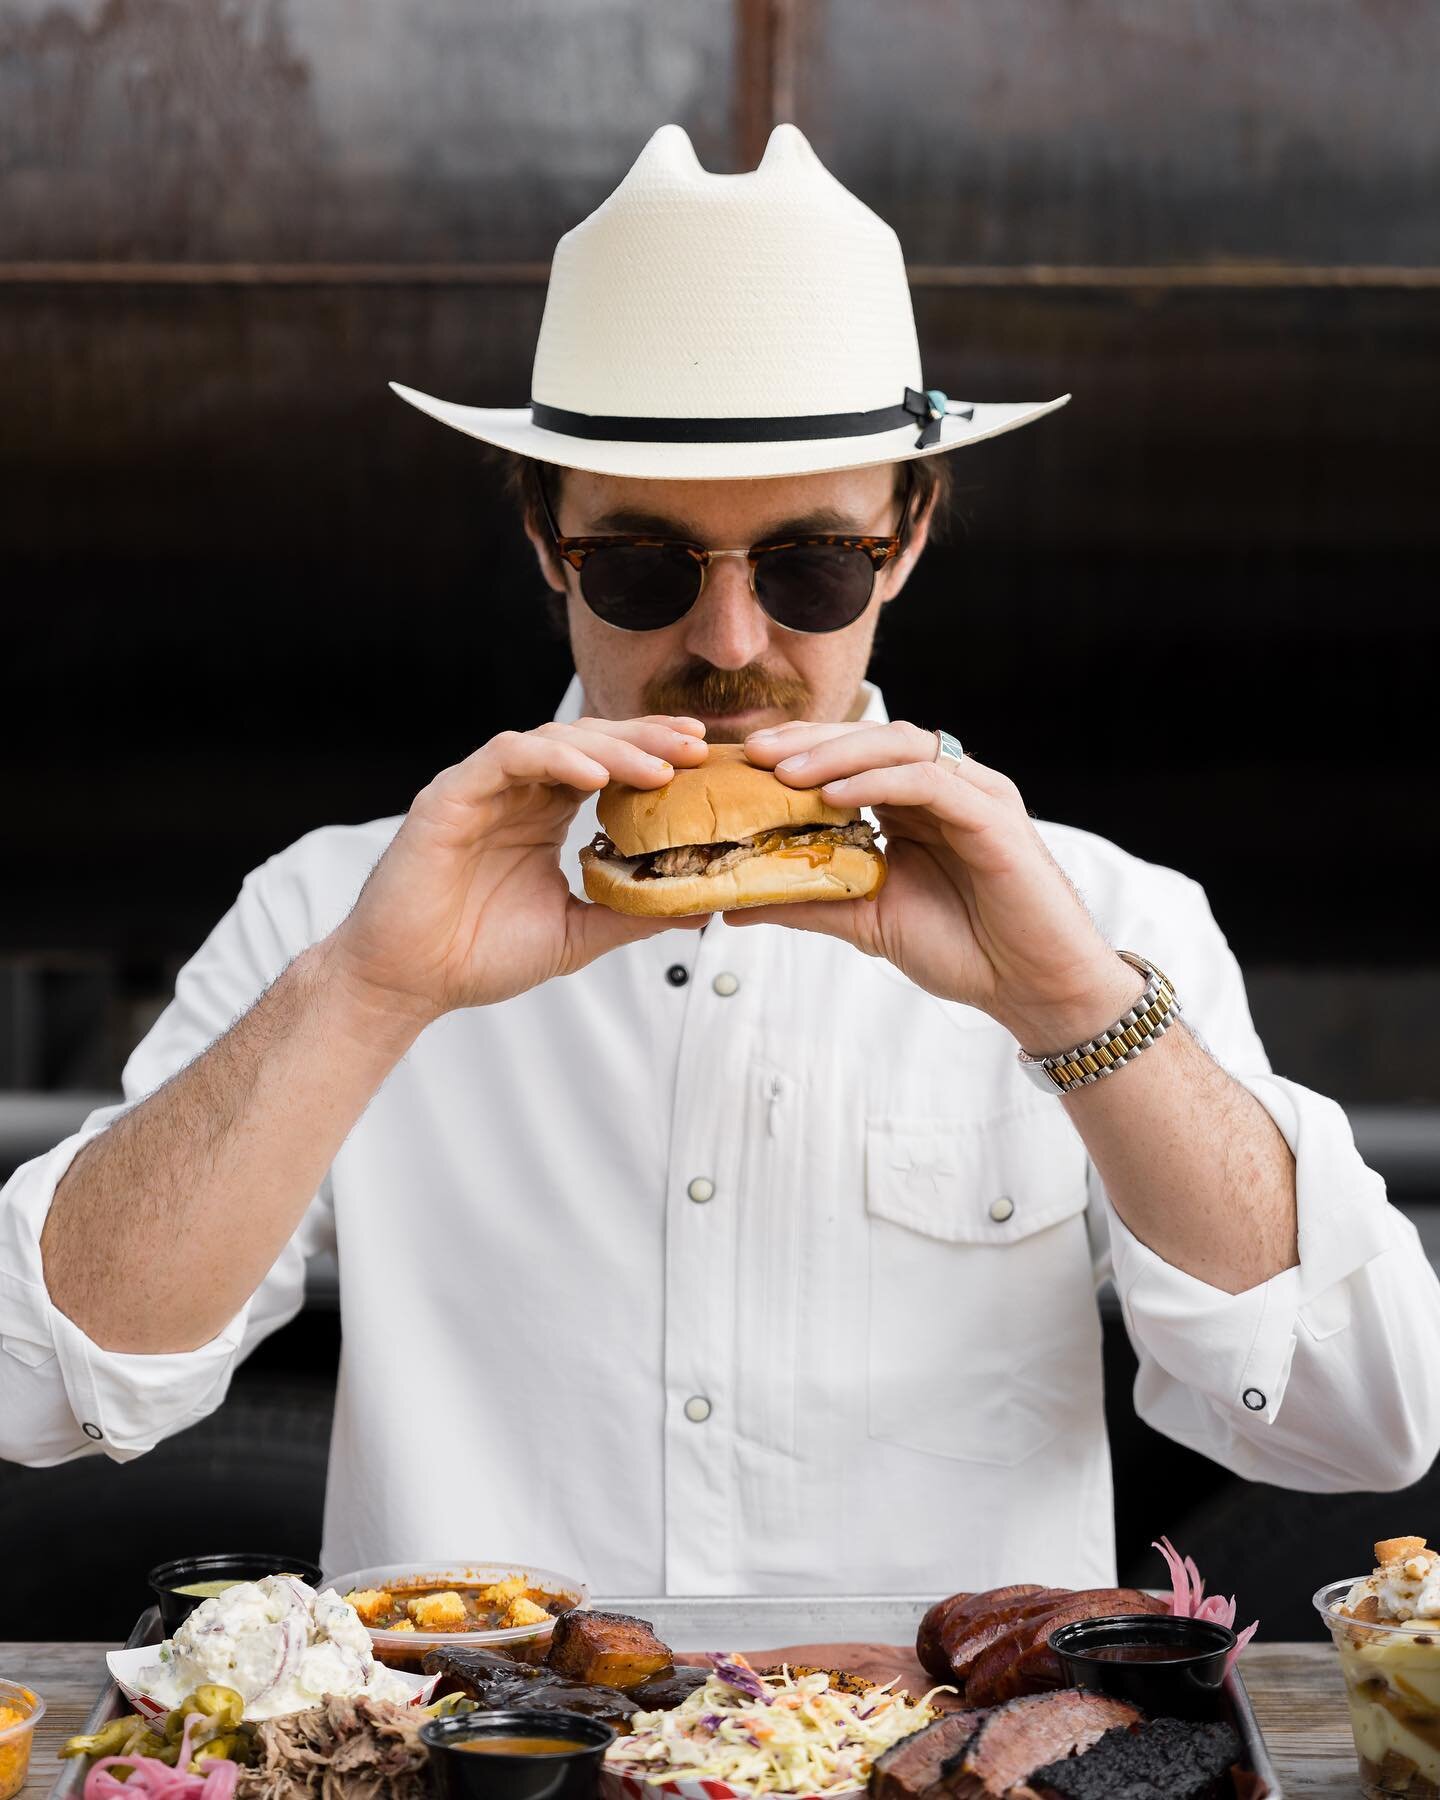 A fun shoot showcasing TexShield from @txstandard with the ultimate test&hellip;sweet &amp; savory glory via @interstellarbbq! 
➡️ Swipe to see it in action!

📸 @travperk_photo 
🎥 @sethreissig 
🤠 @sammynax89